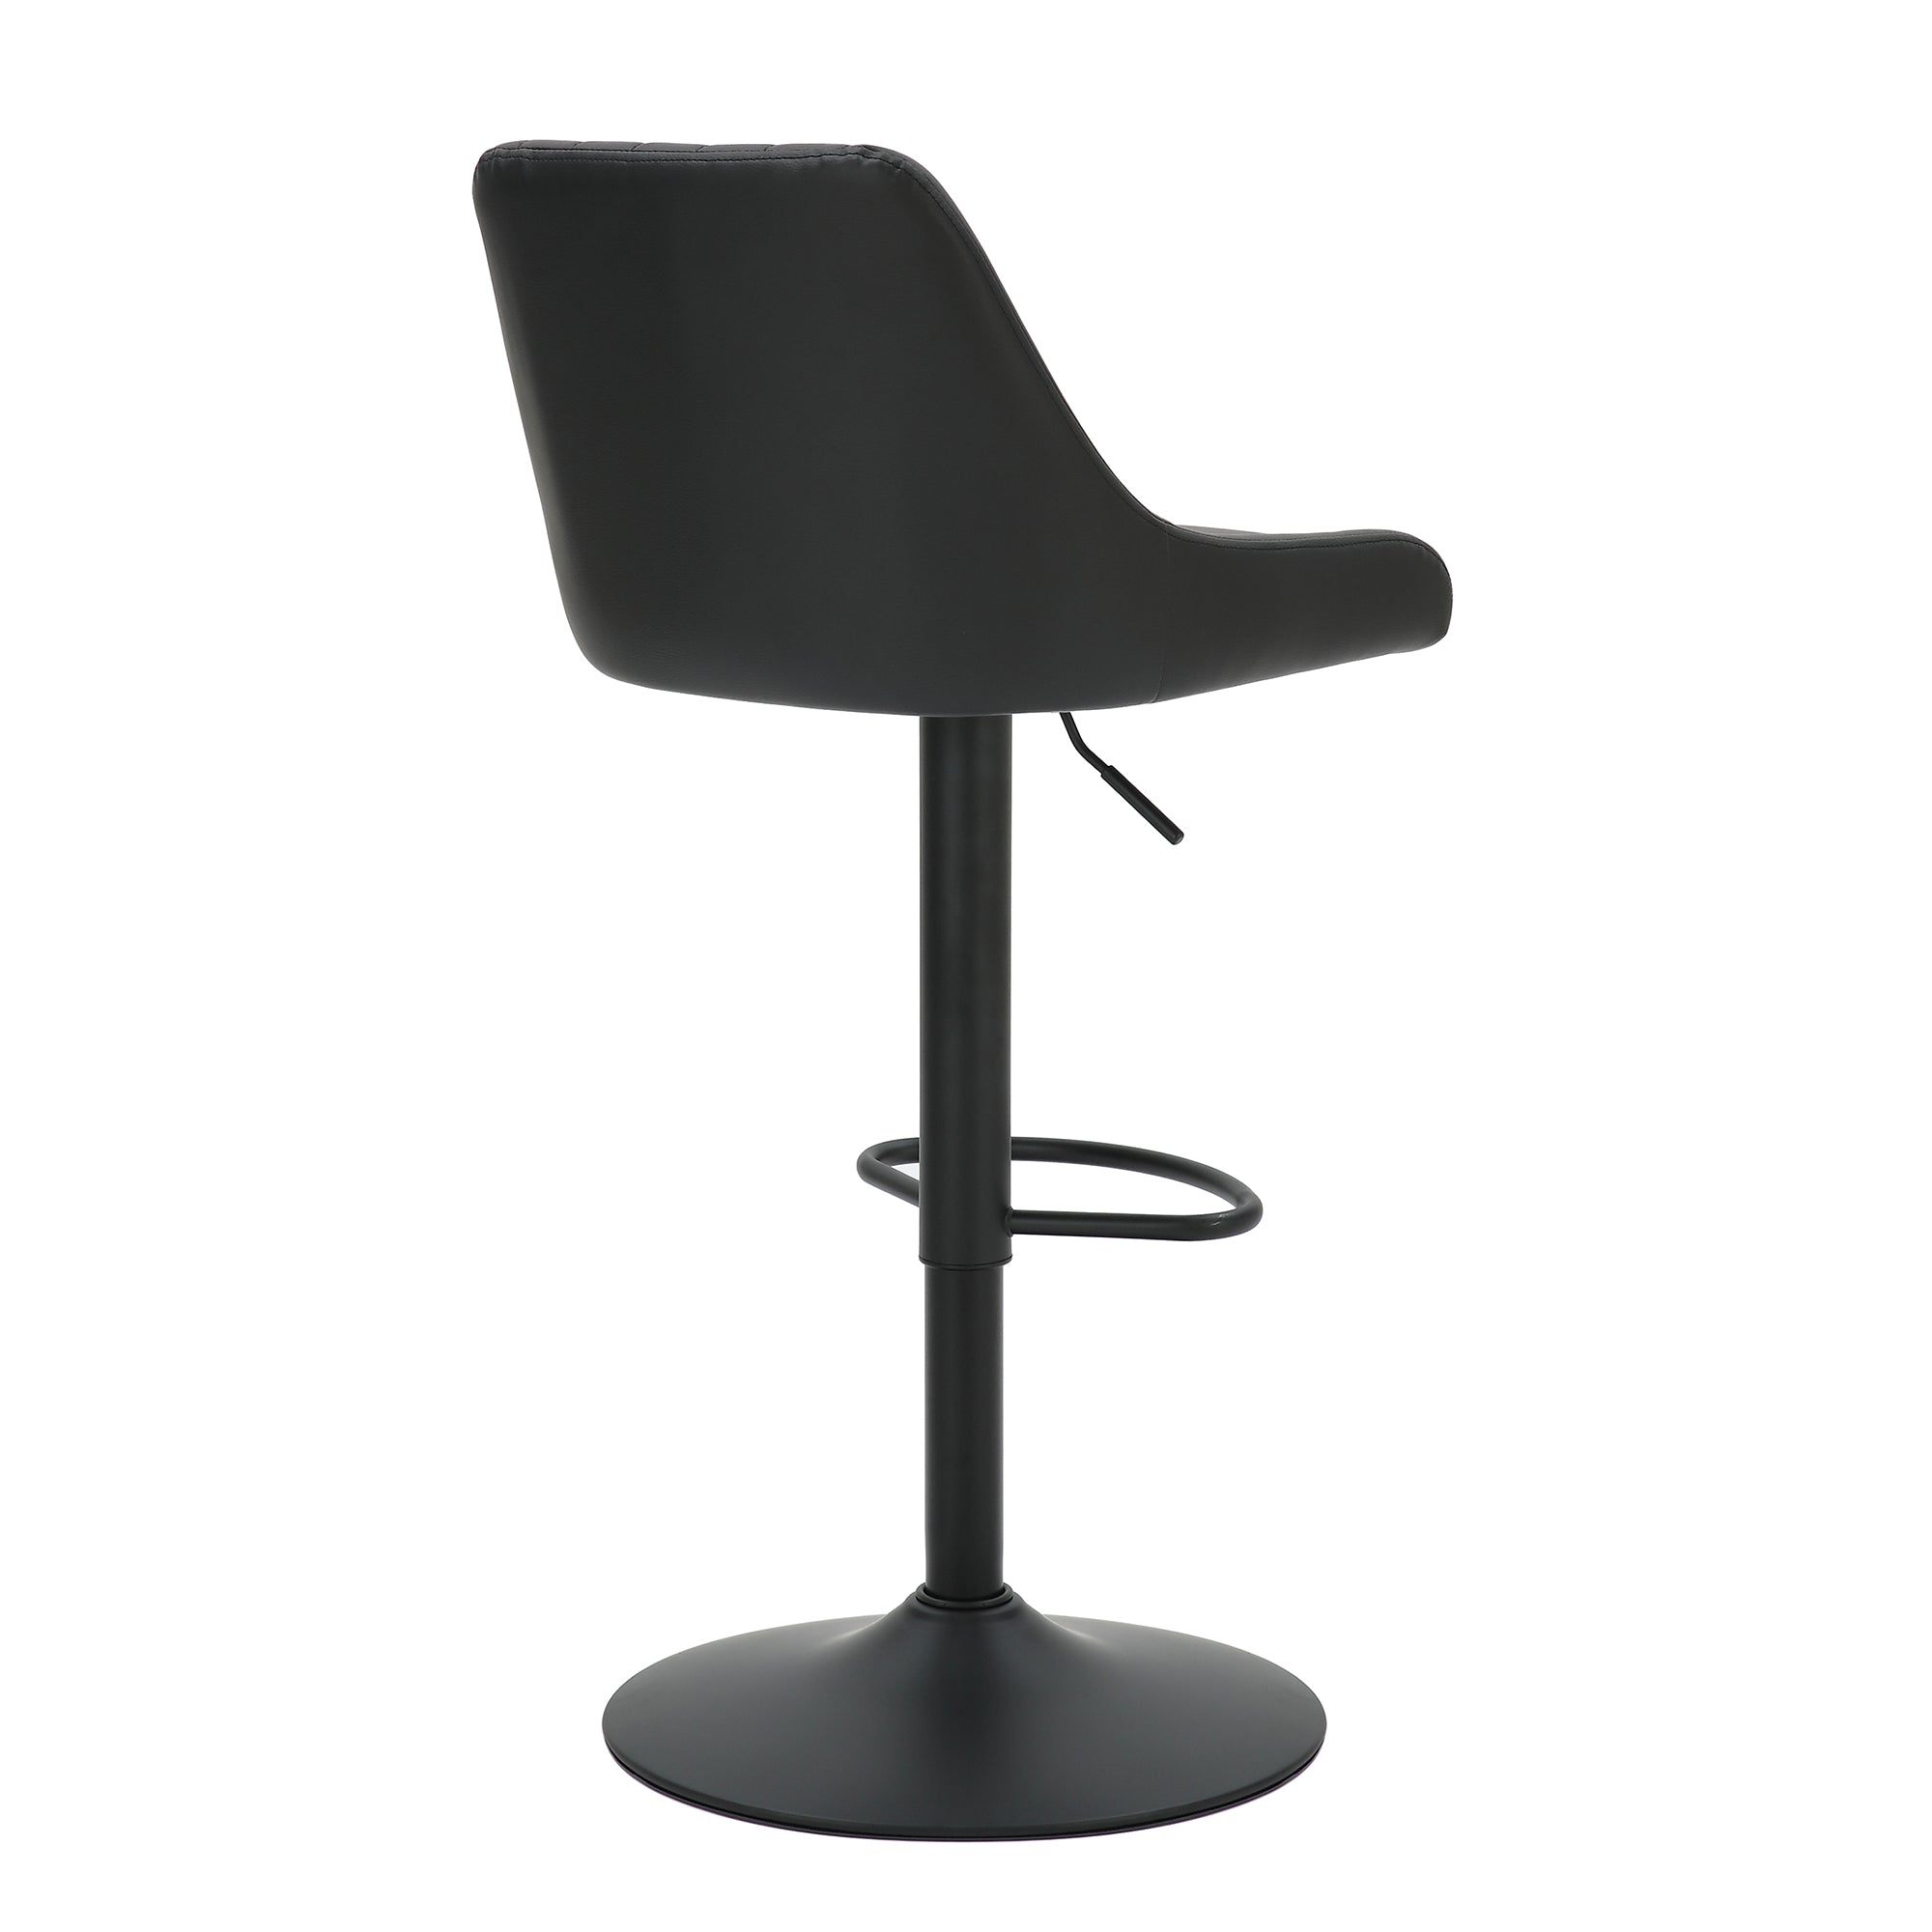 Kron Adjustable Height Air-Lift Swivel Stool, Set of 2, in Black Faux Leather 203-574PUBK